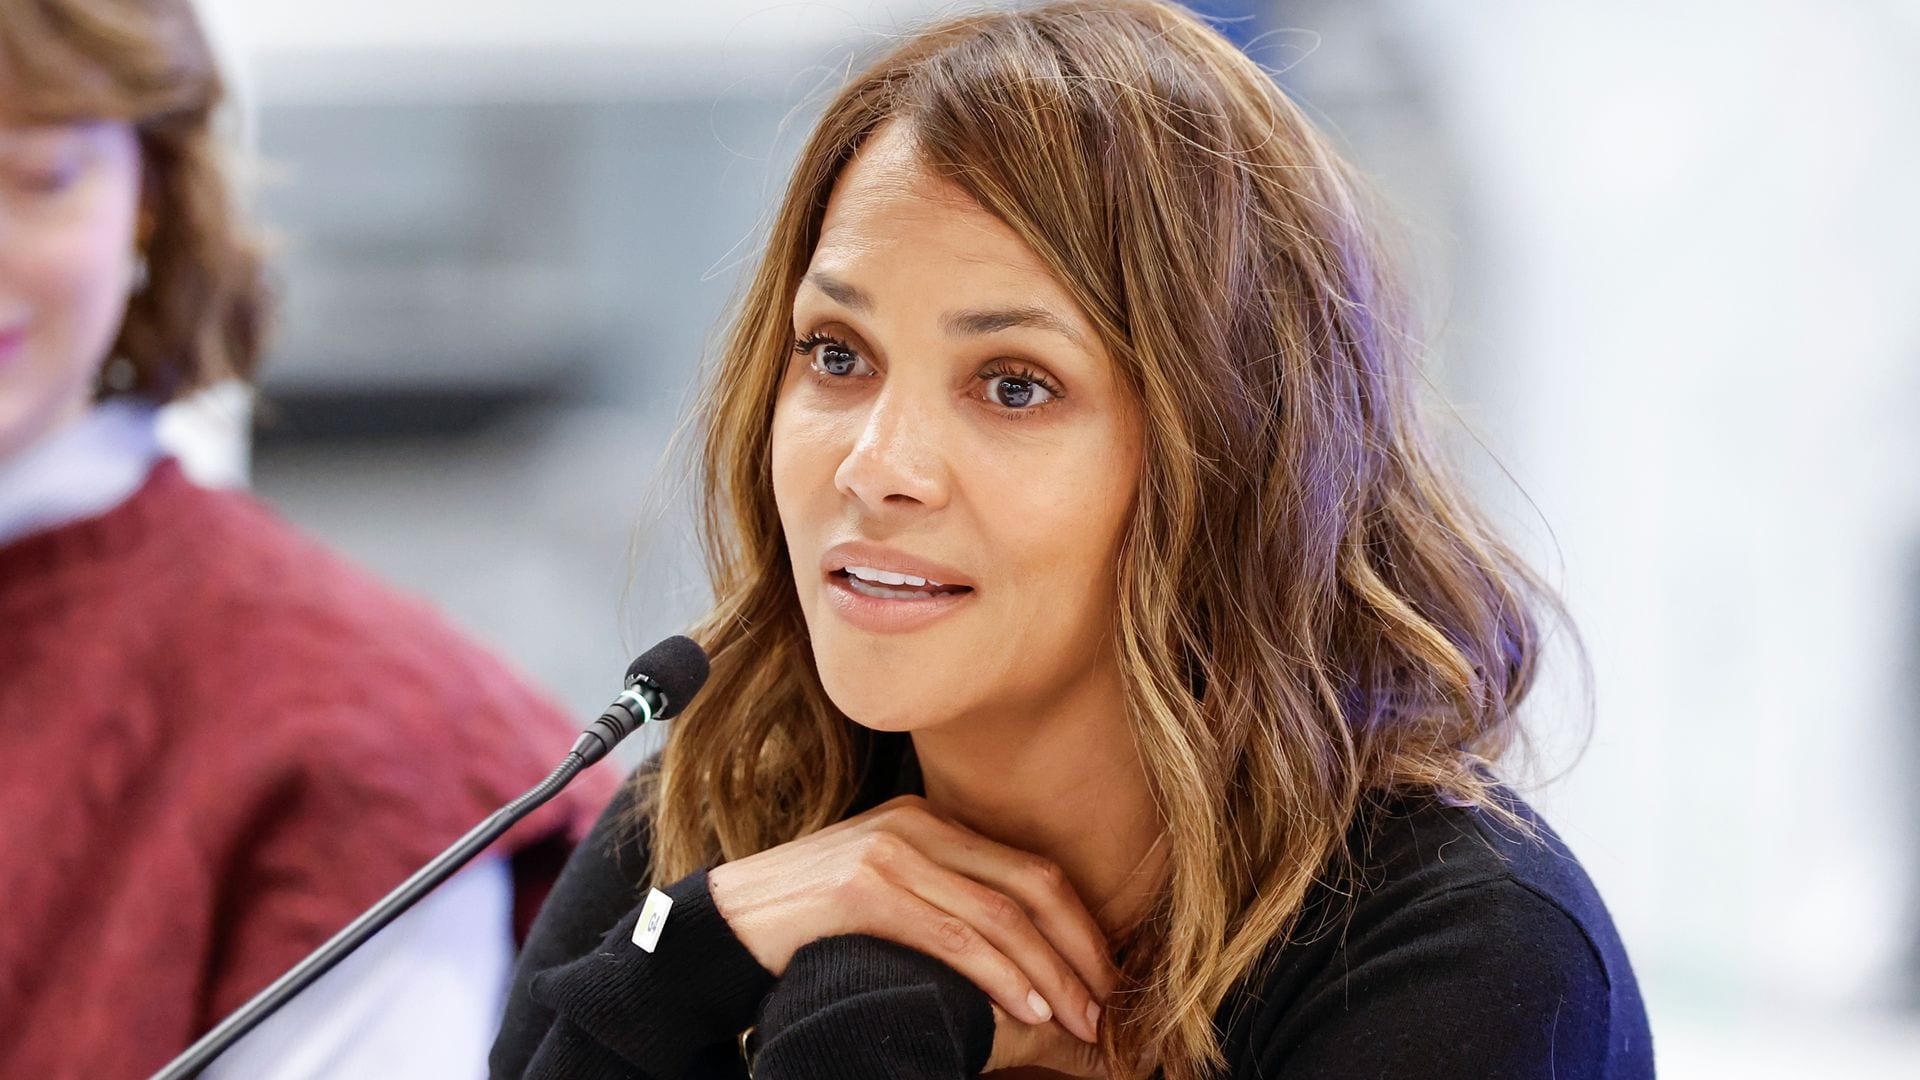 Halle Berry speaks during a roundtable discussion highlighting women's health research at University of Illinois on January 11, 2024 in Chicago, Illinois. (Photo by Kamil Krzaczynski/Getty Images)